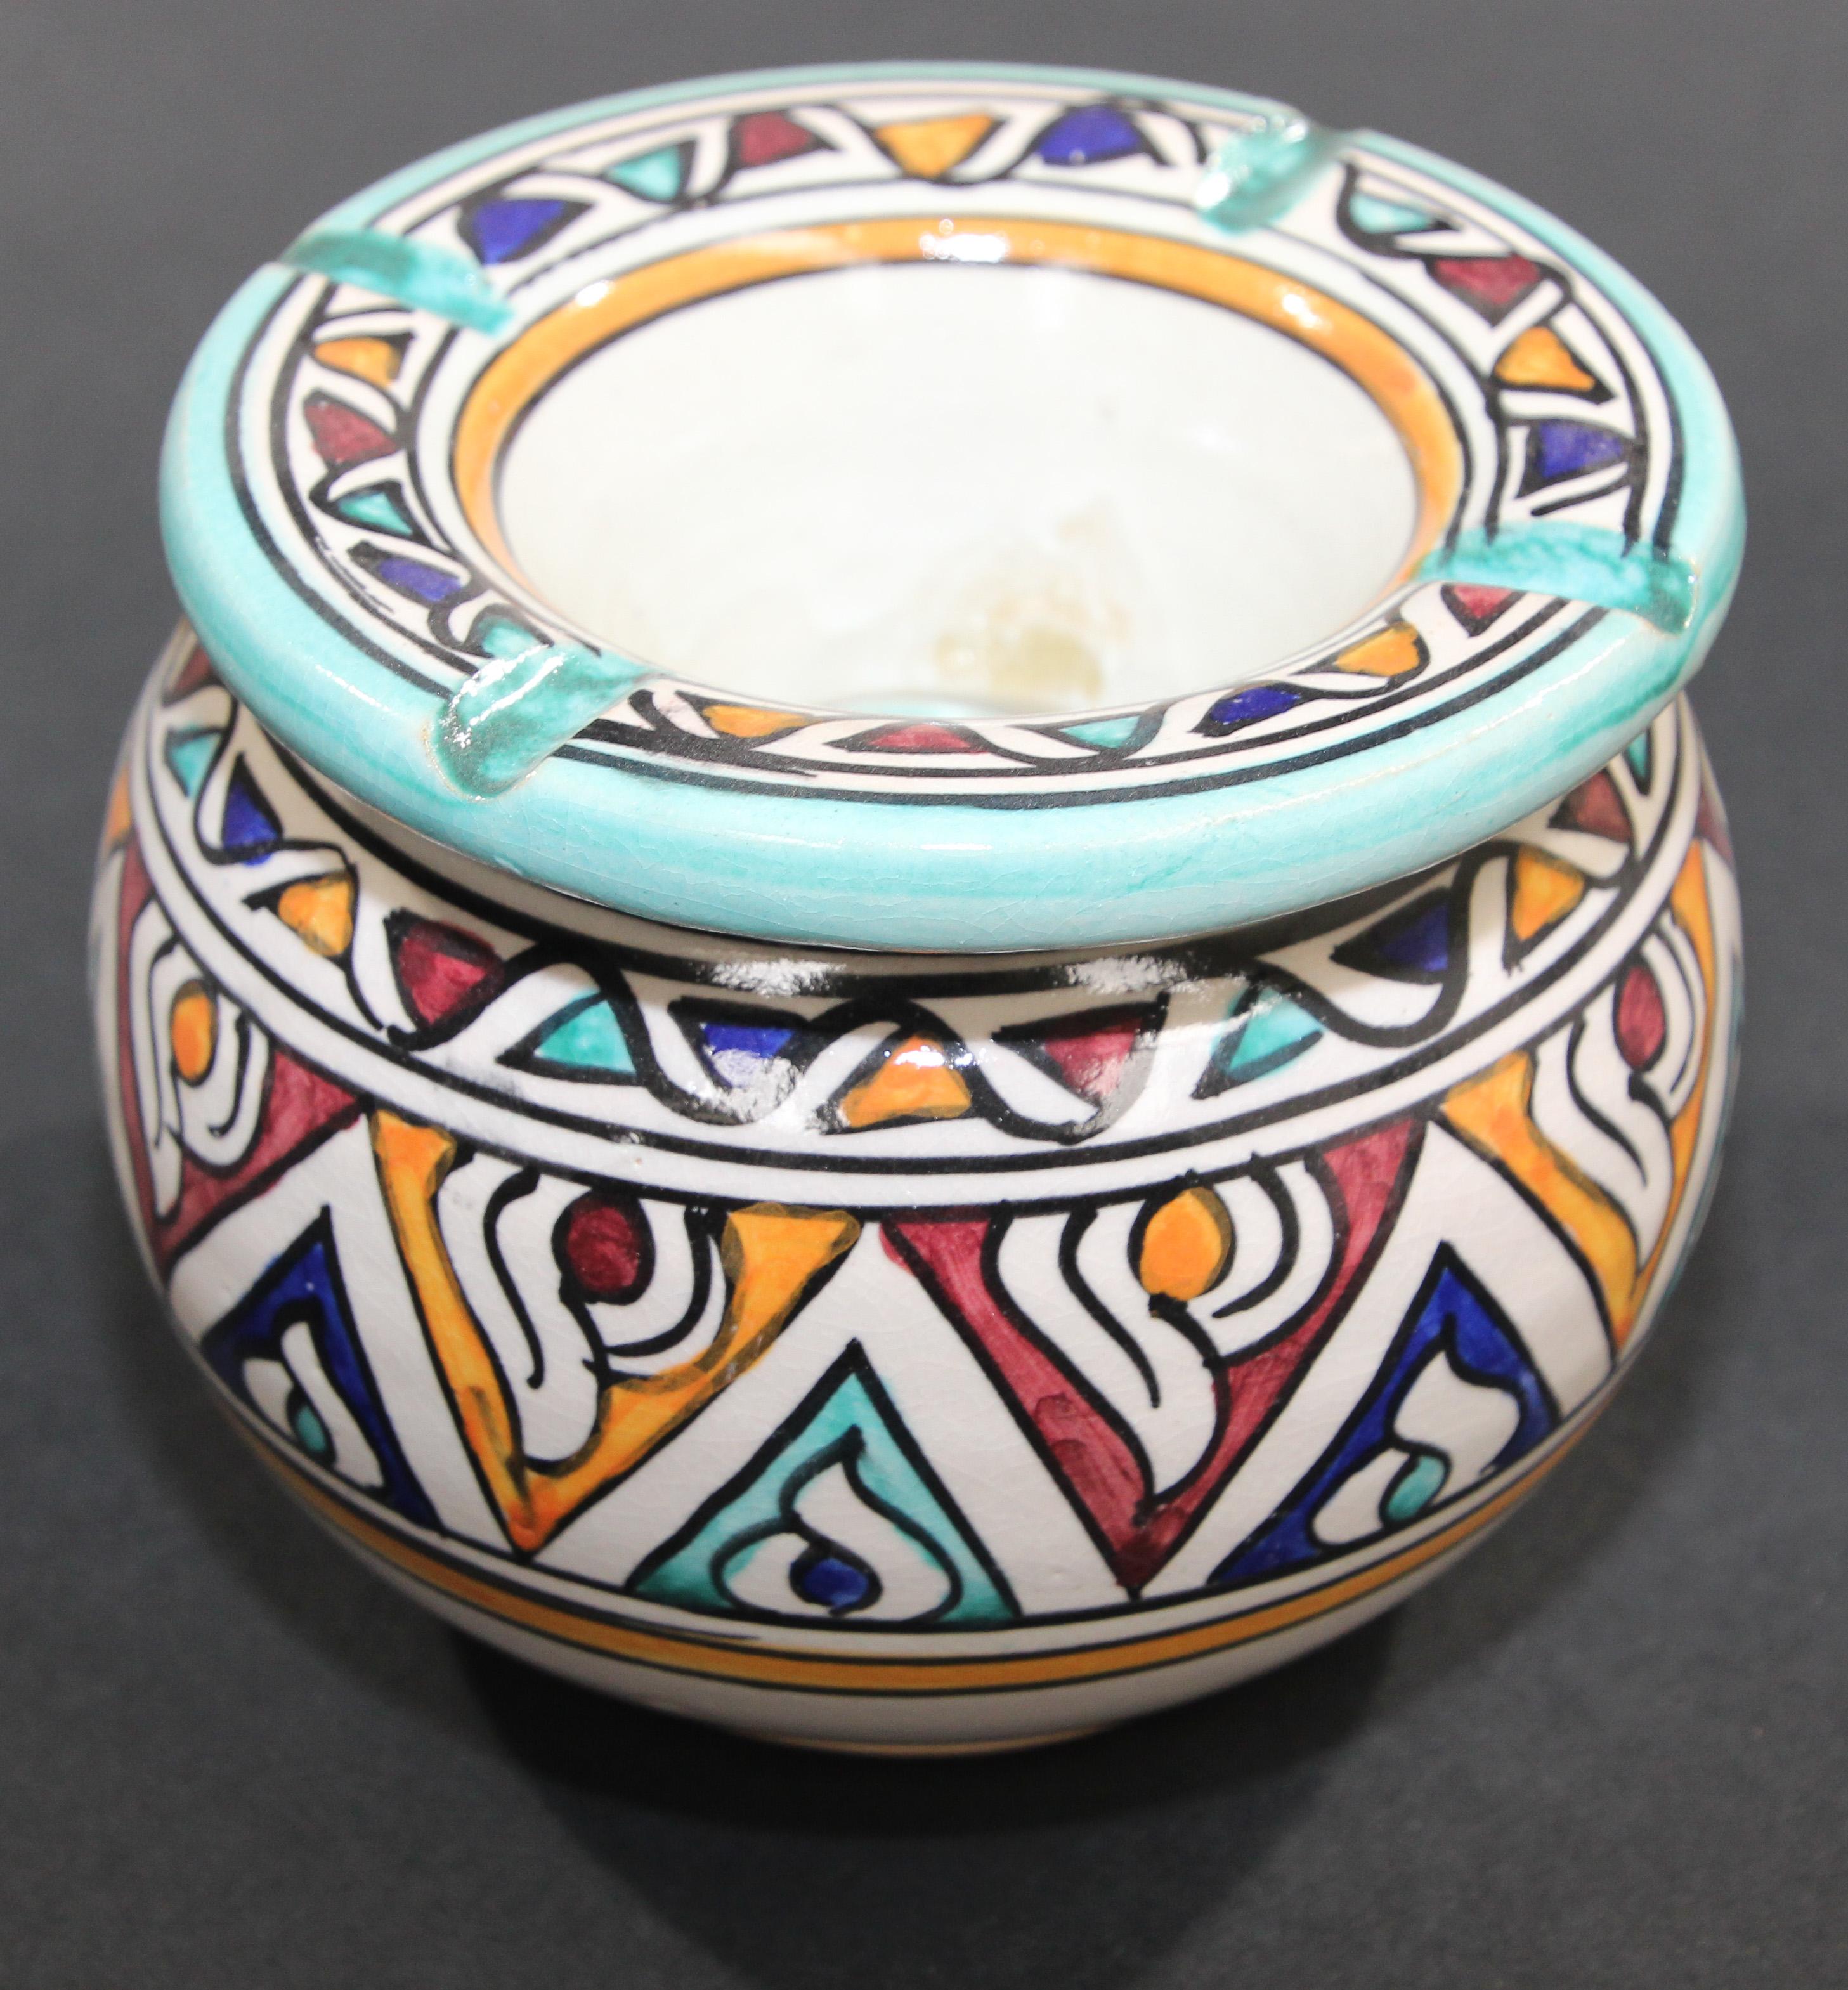 Large Moroccan covered hand painted ceramic ashtray.
Handcrafted Moroccan ceramic covered ash receiver.
This covered ashtray could be used indoor and outdoor.
If used indoor the cover will keep the smell of ashes in.
Hand painted Moorish